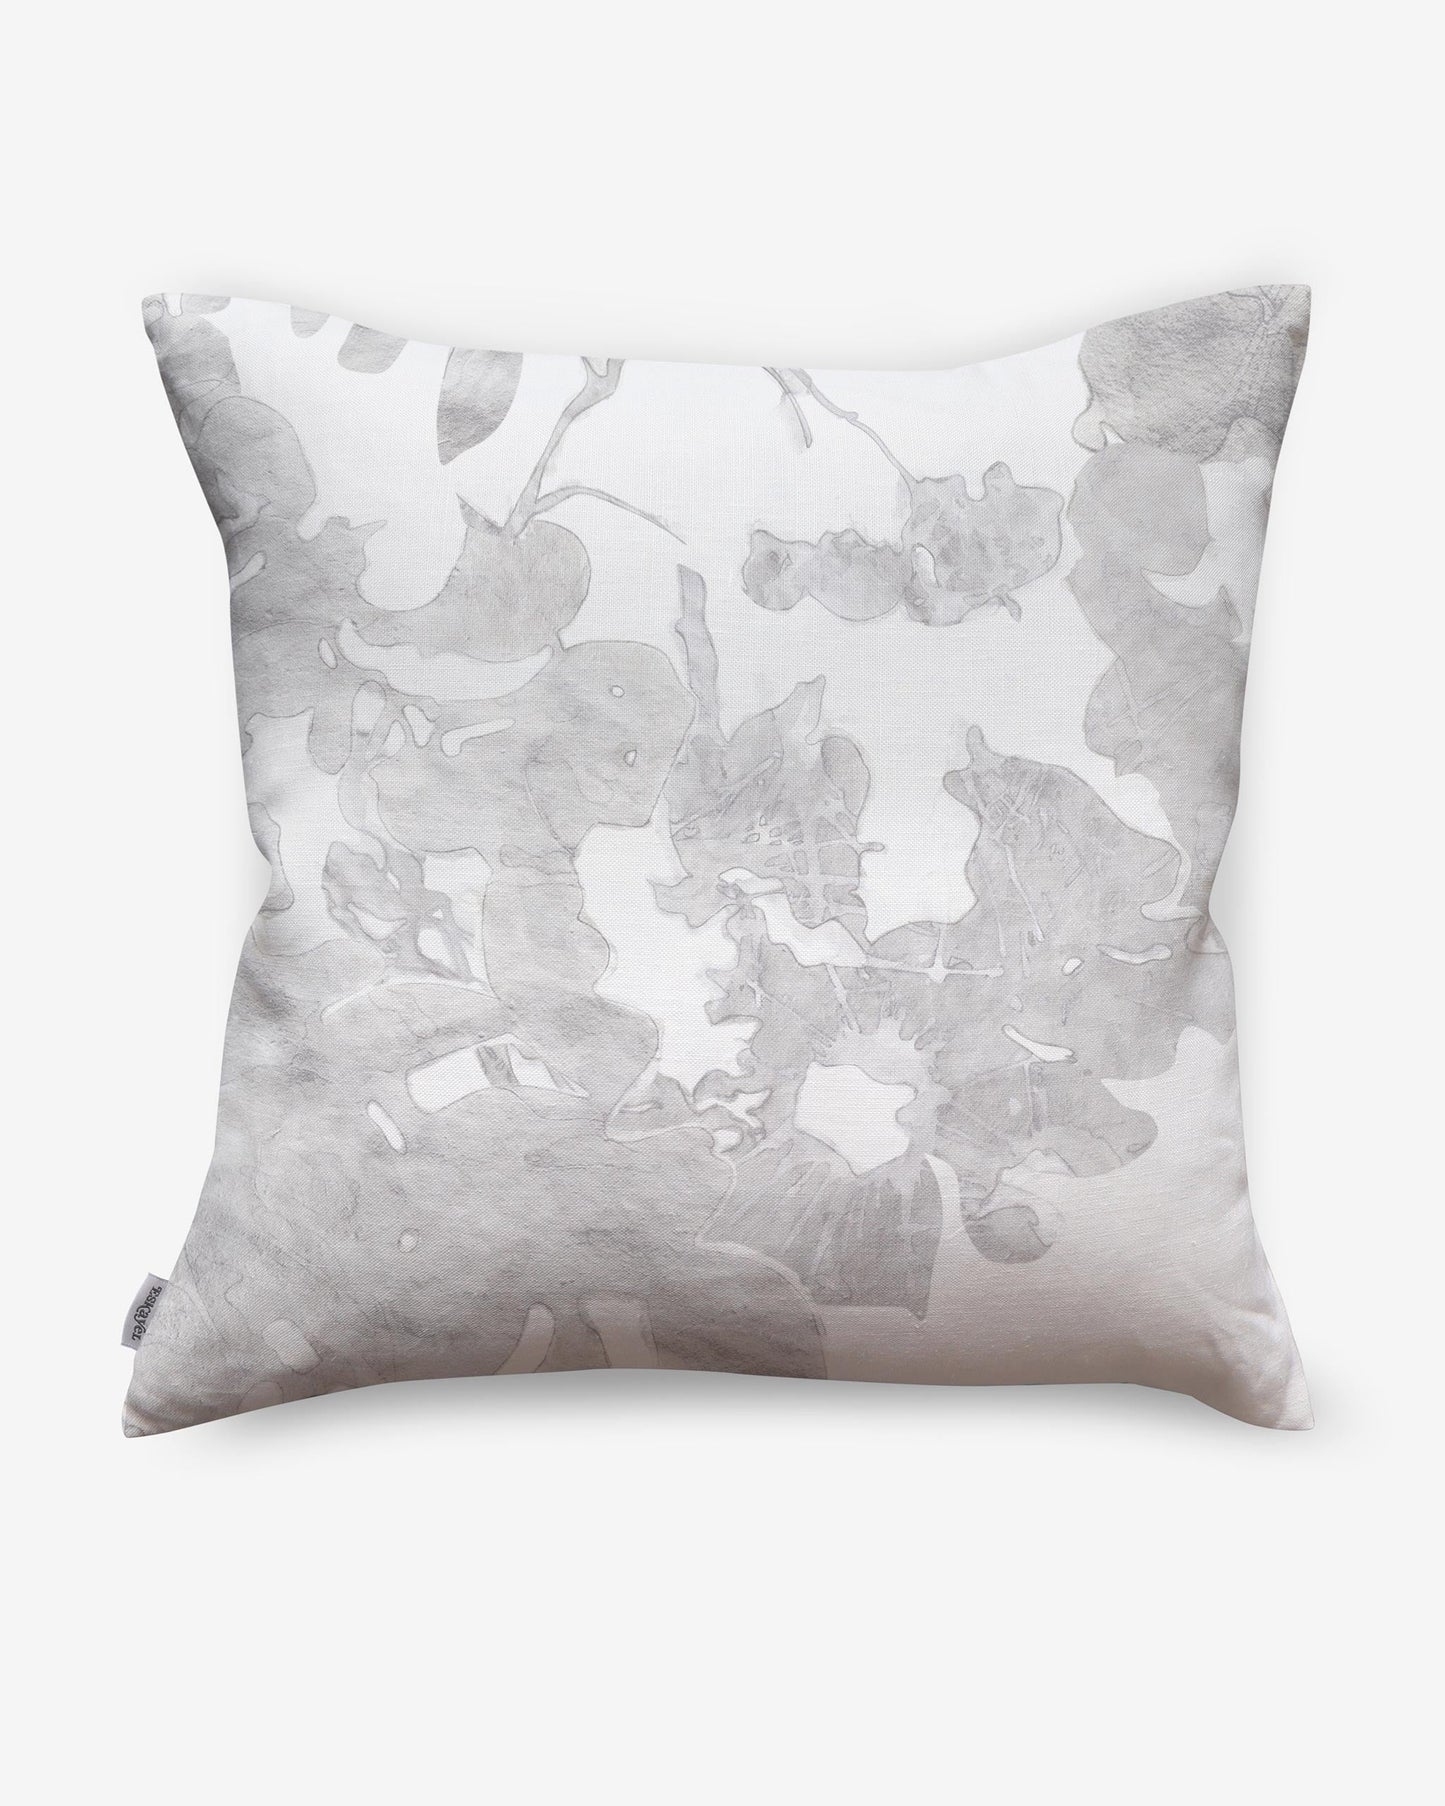 An Up For Anything Pillow Pearl with a watercolor botanical pattern design on it